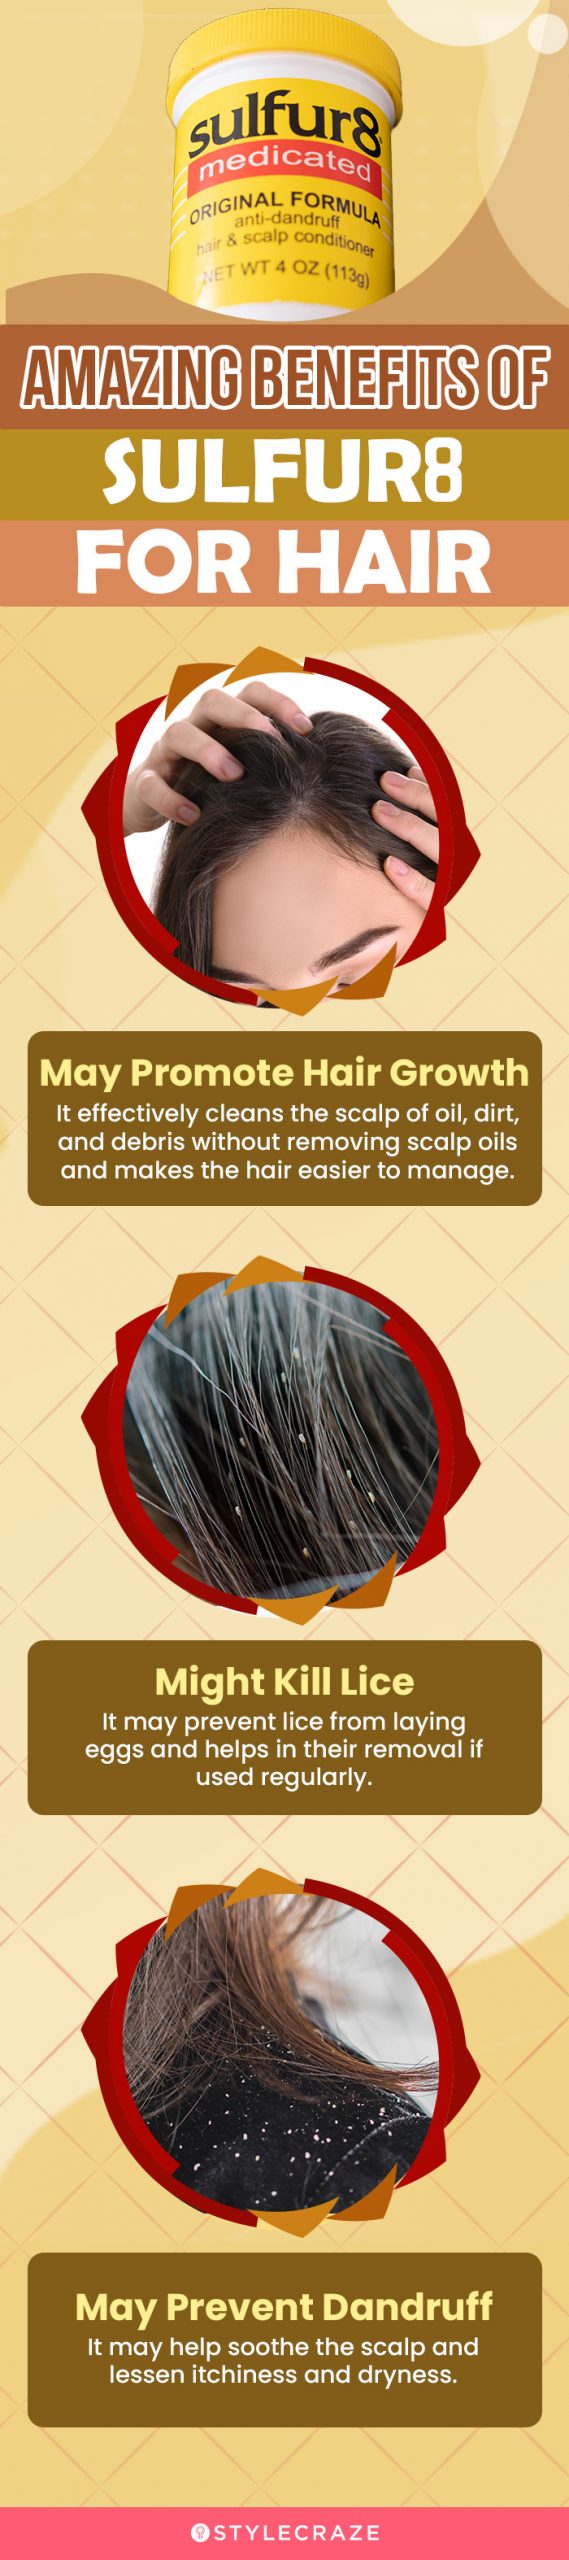 amazing benefits of sulfur8 for hair (infographic)